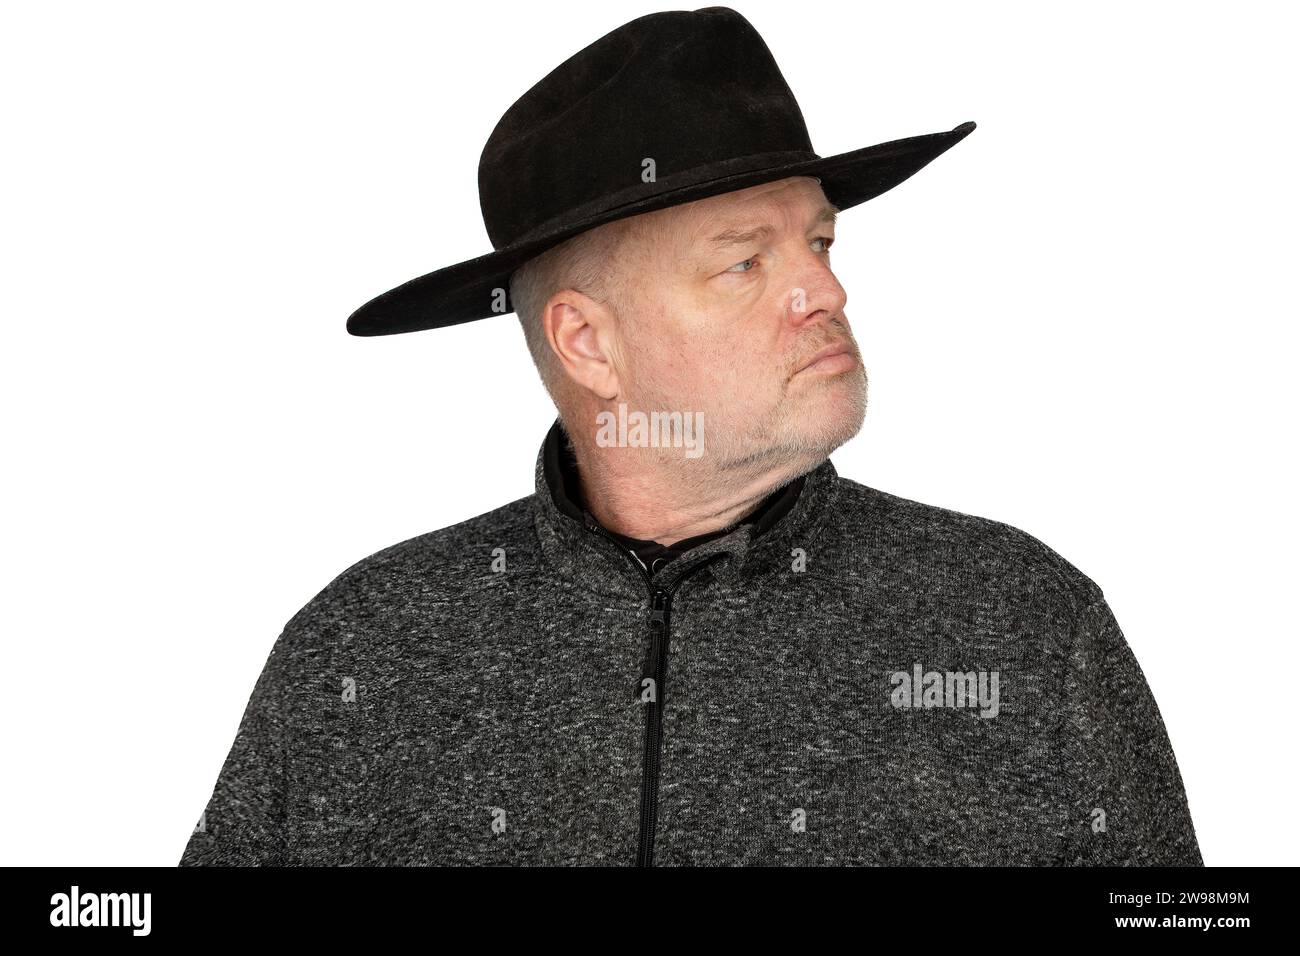 Serious Middle-Aged Caucasian Man in Worn Cowboy Hat looking to the Side - Isolated Portrait on White Background Stock Photo